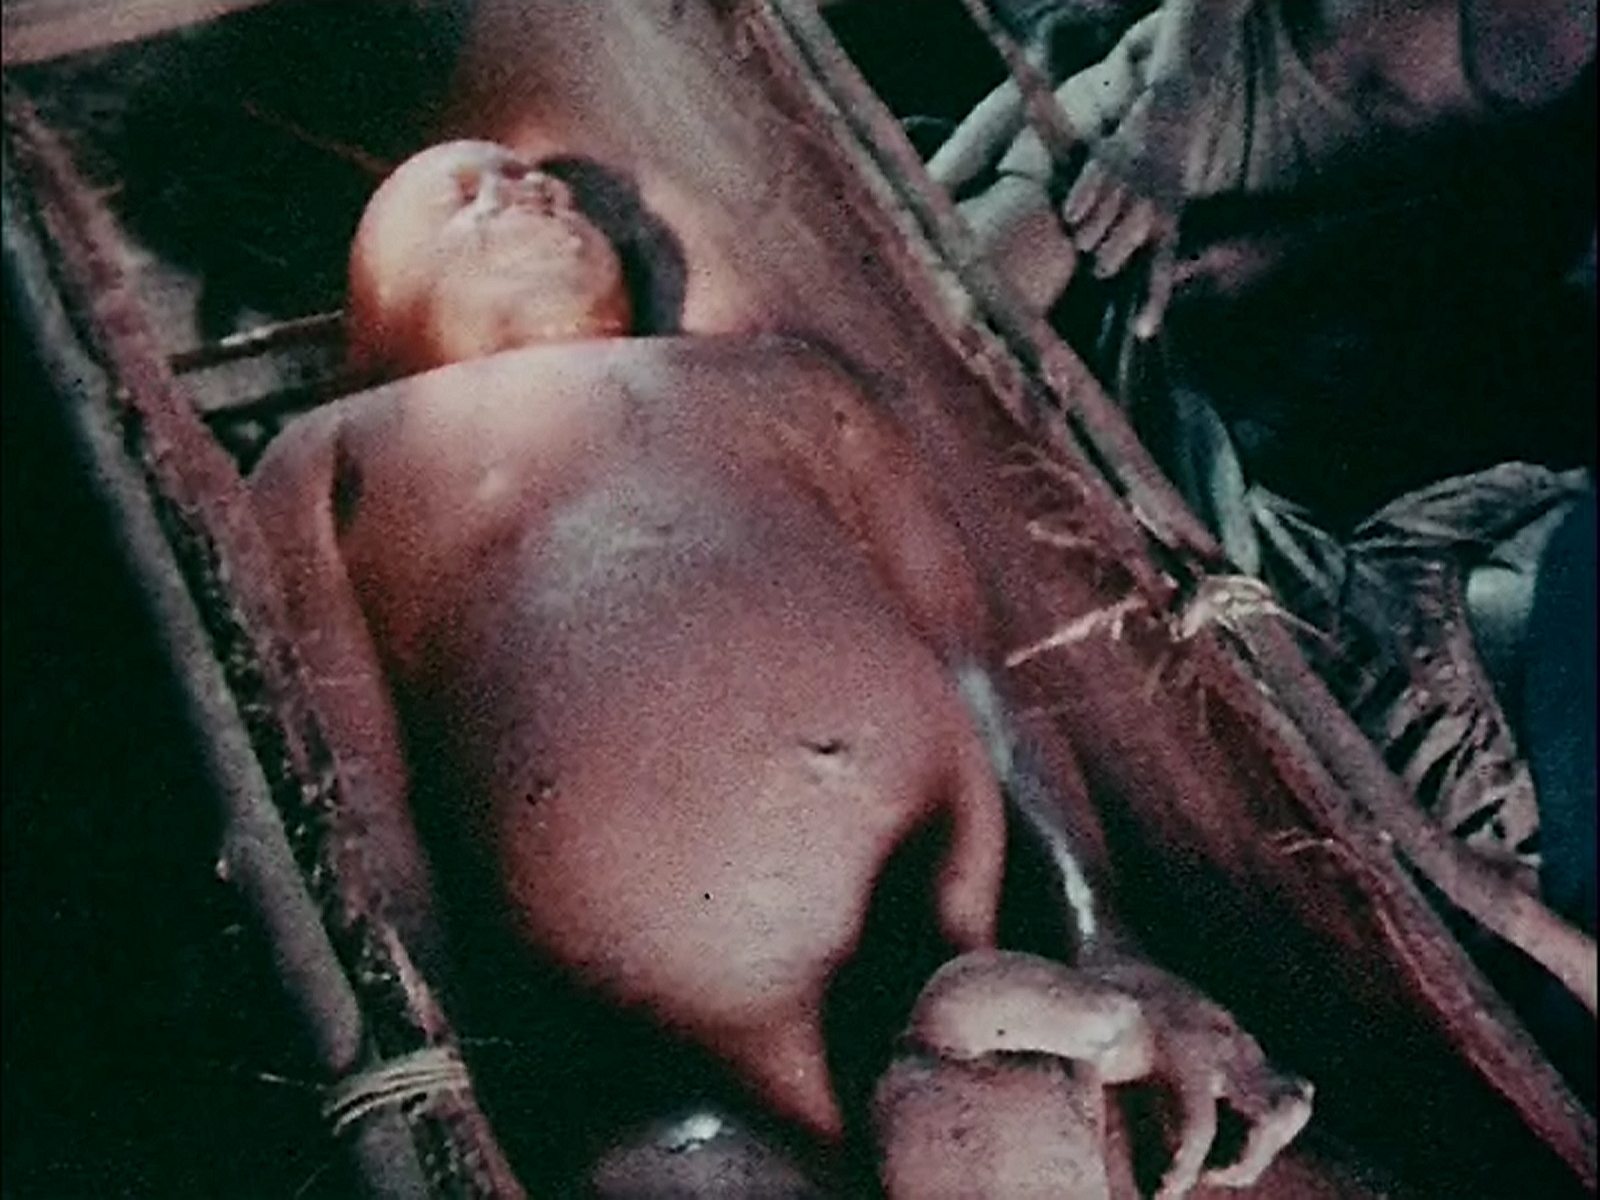 http://sinsofcinema.com/Images/Real%20Cannibal%20Holocaust/Real%20Cannibal%20Holocaust%20DVD%20One7%20Movies.jpg